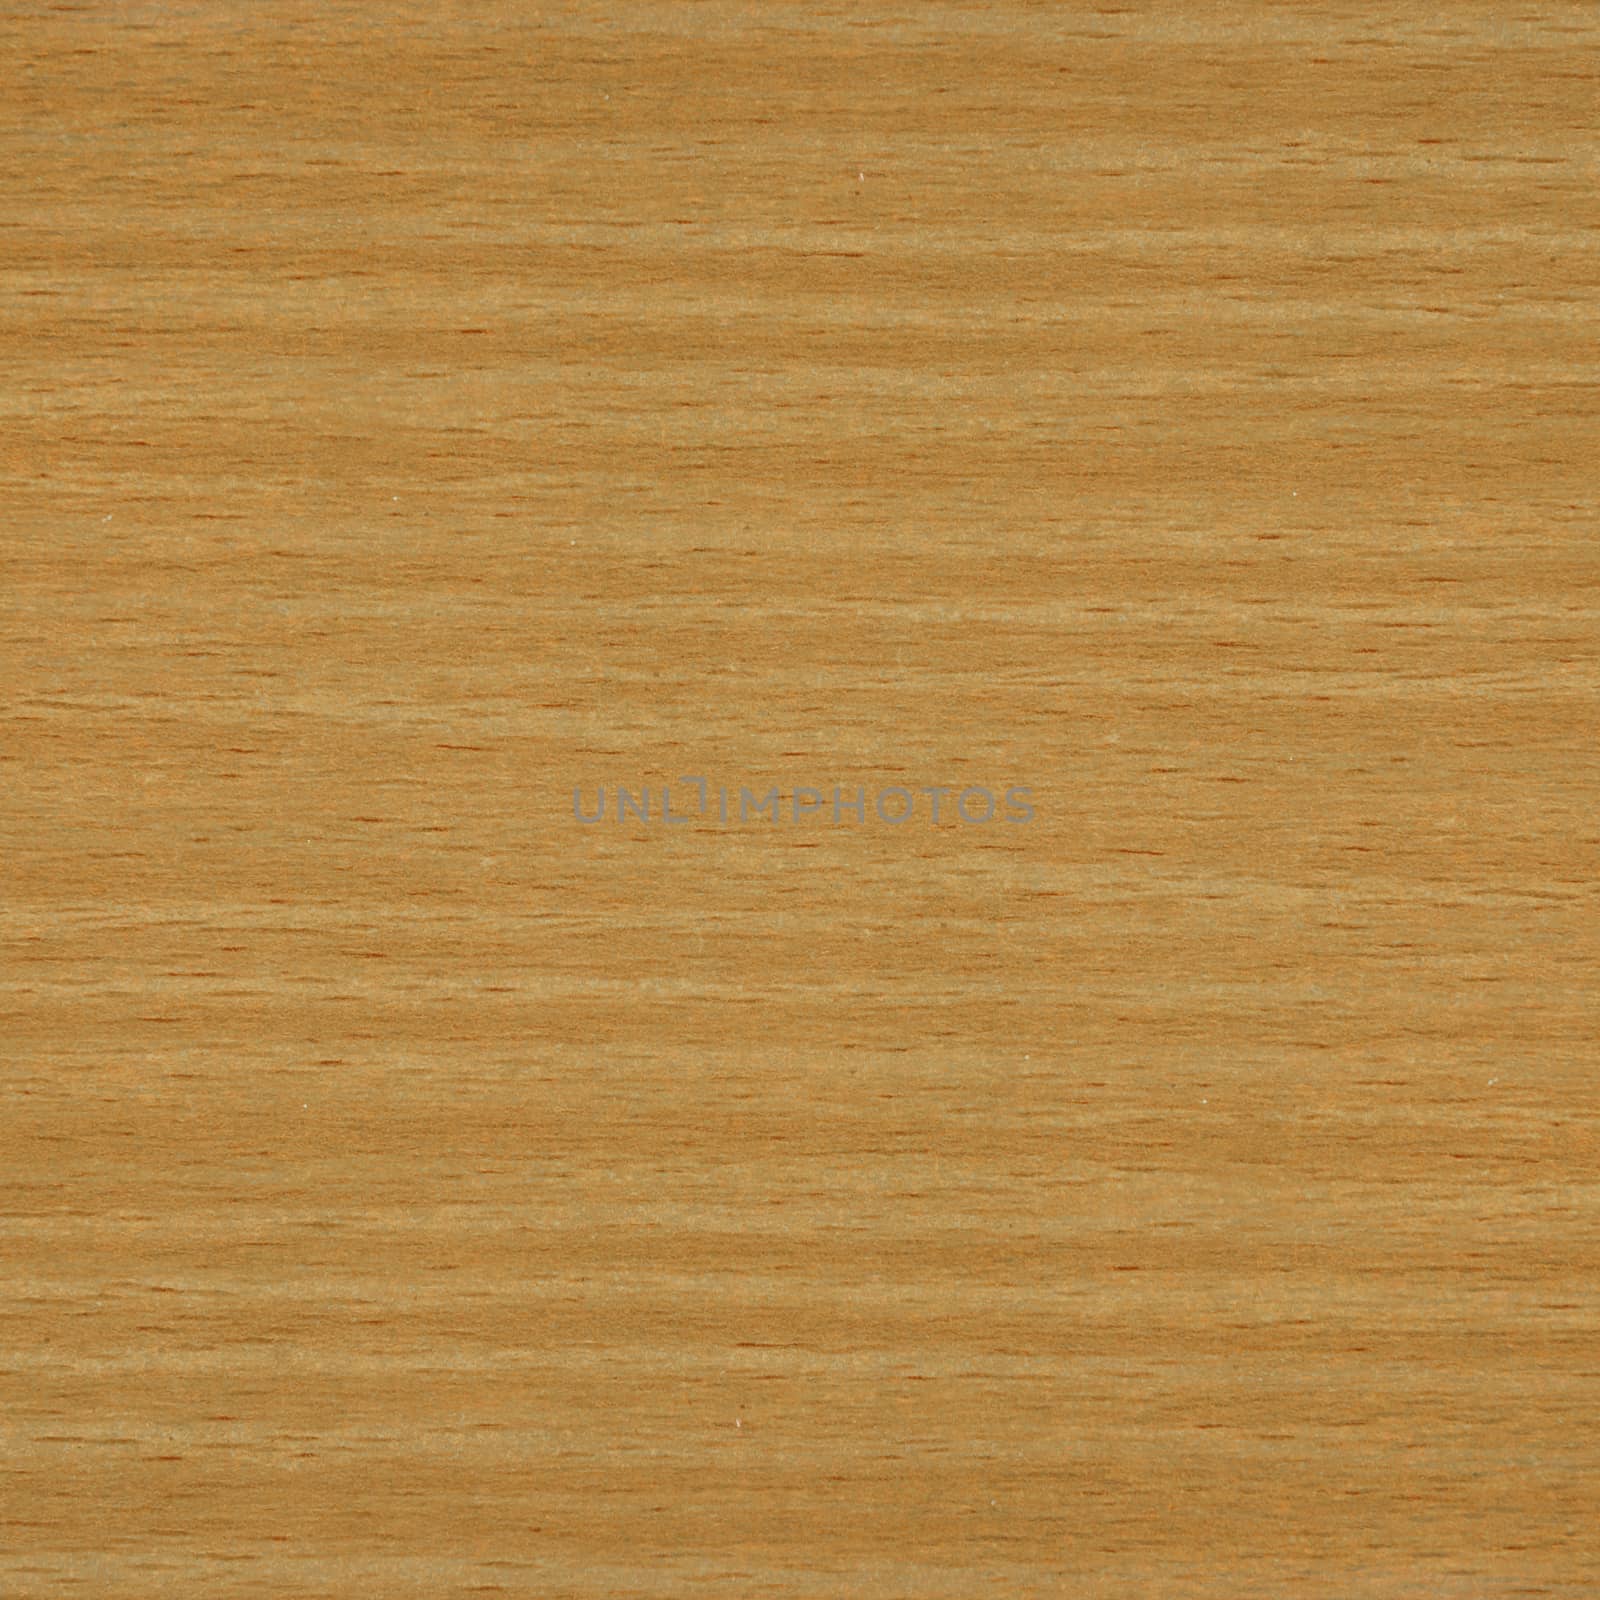 Texture of wood pattern background by Noppharat_th